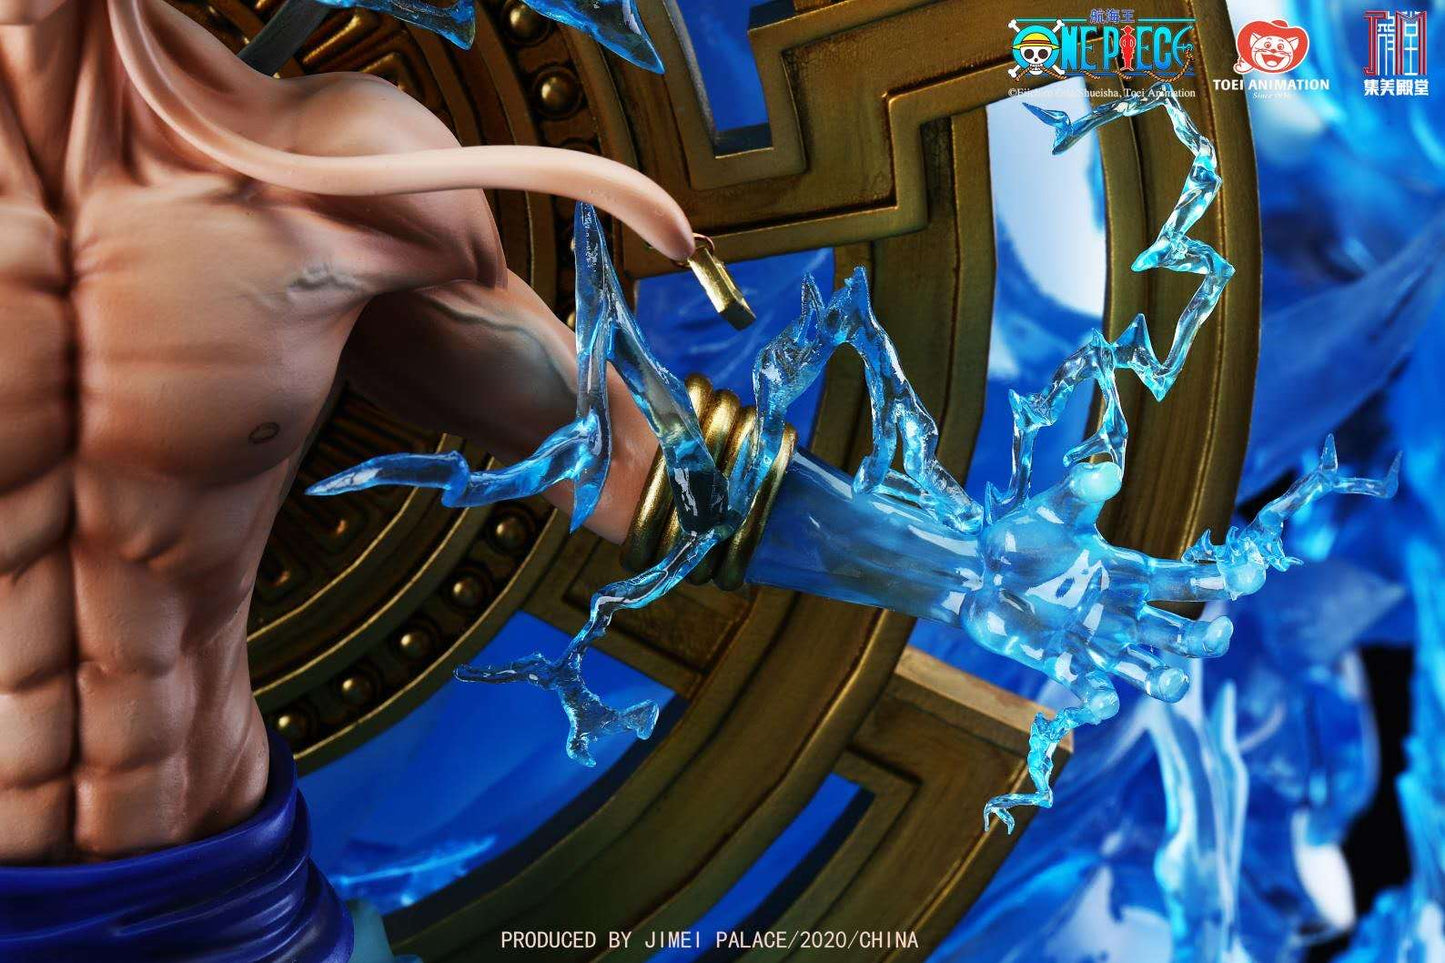 One Piece Enel The God of Thunder (Licensed) Resin Statue - JIMEI PALACE Studio [In-Stock]